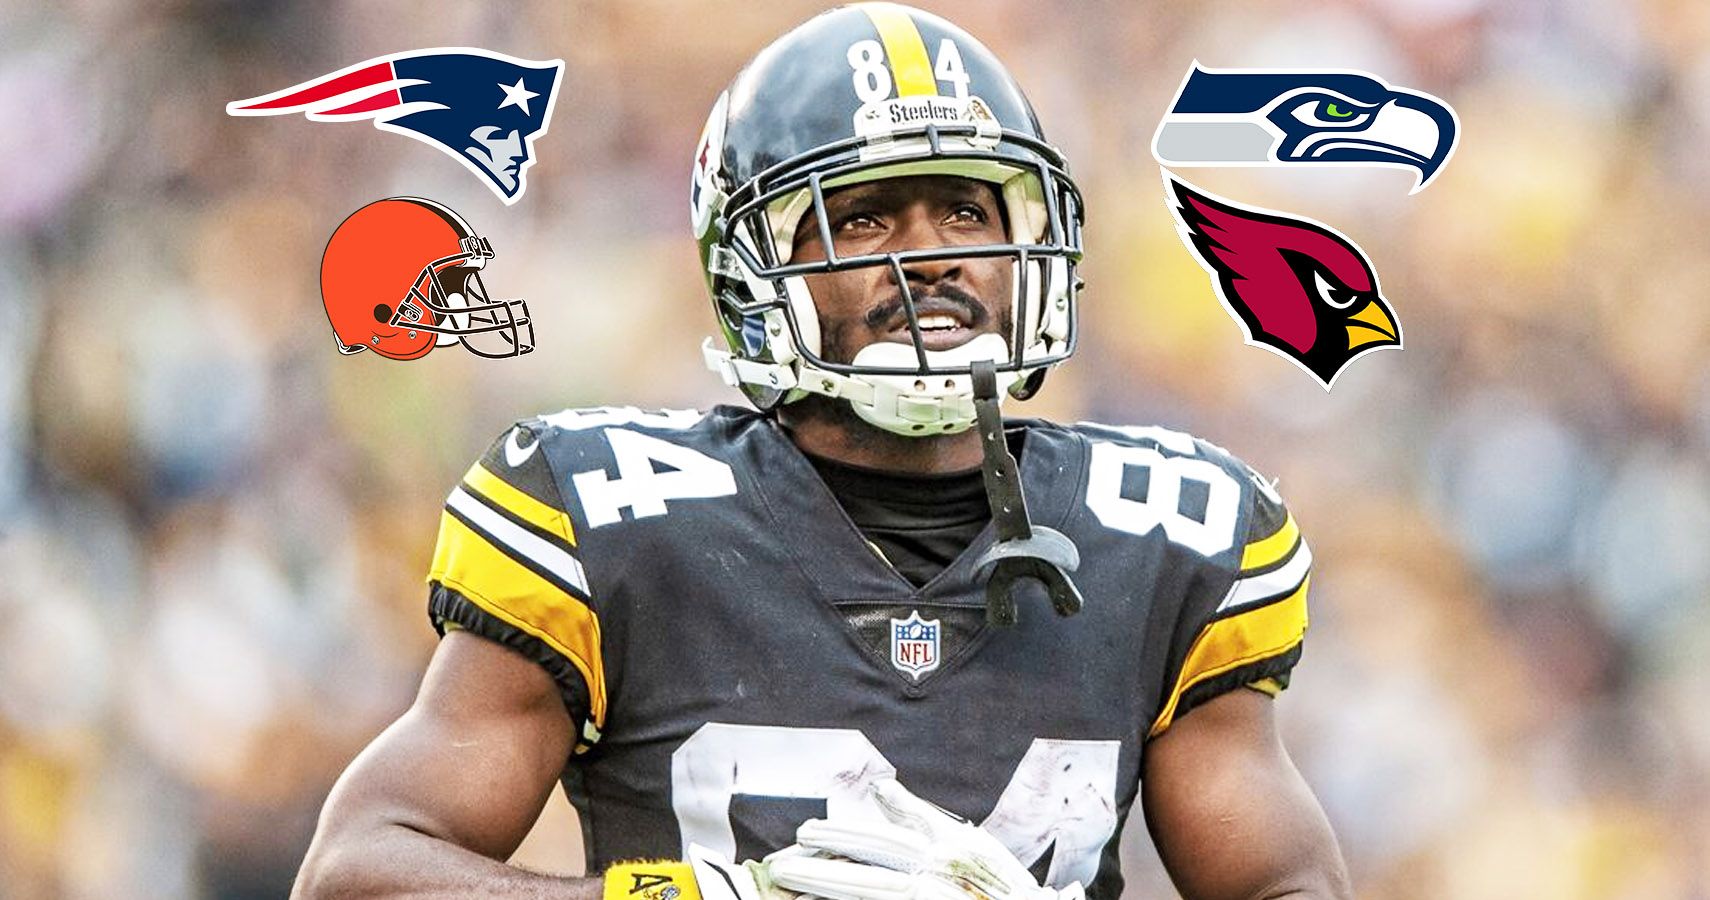 How many NFL teams has Antonio Brown played for?